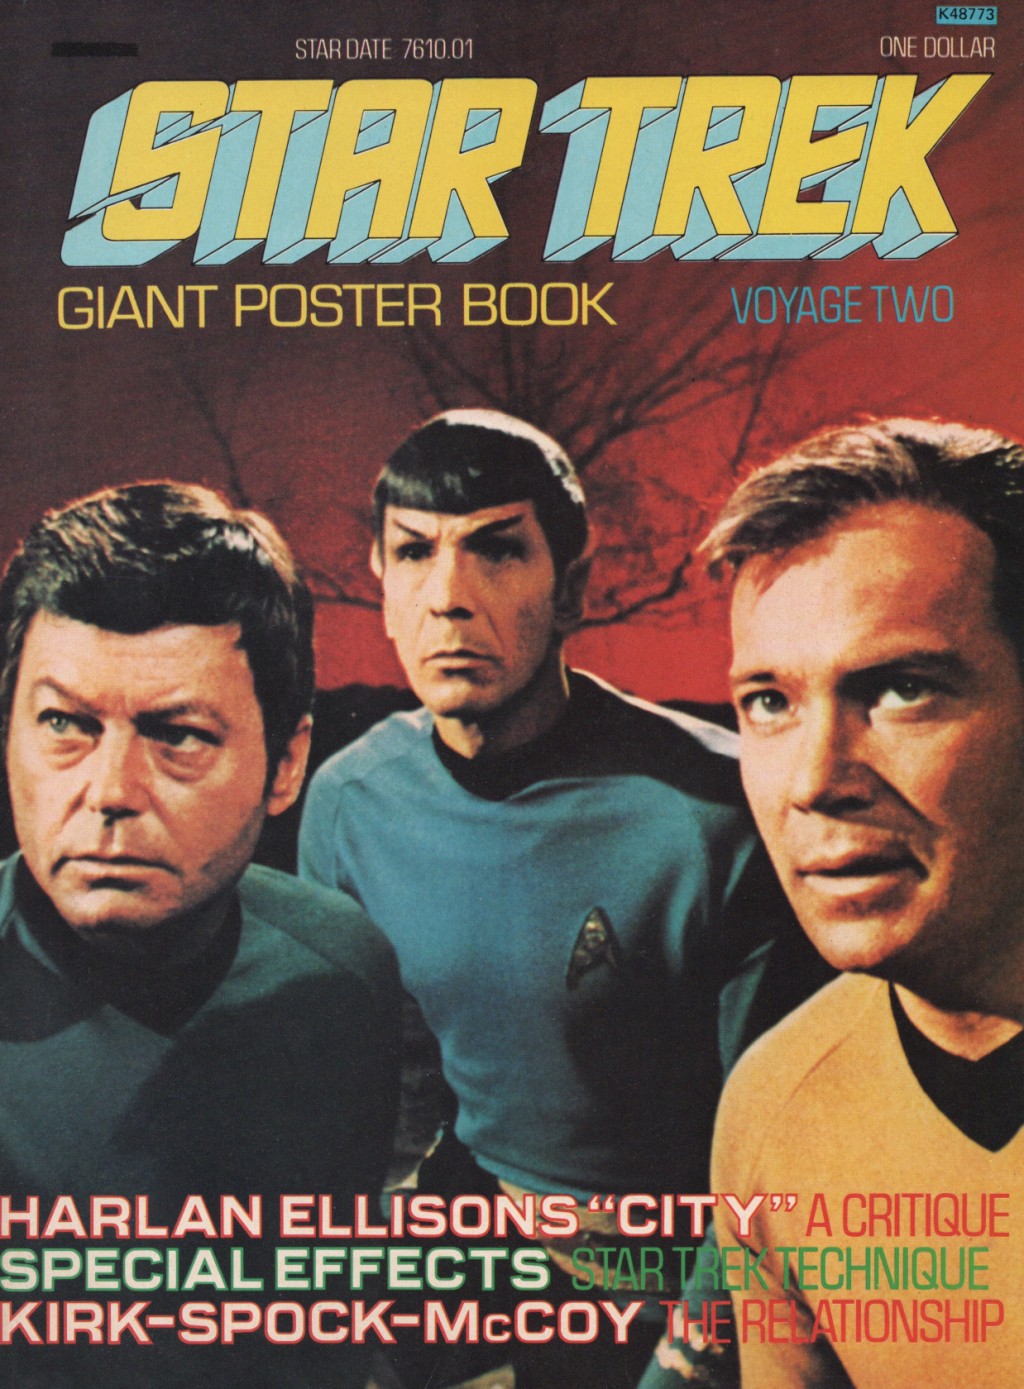 Giant Poster Book two: insights into those amazing special effects